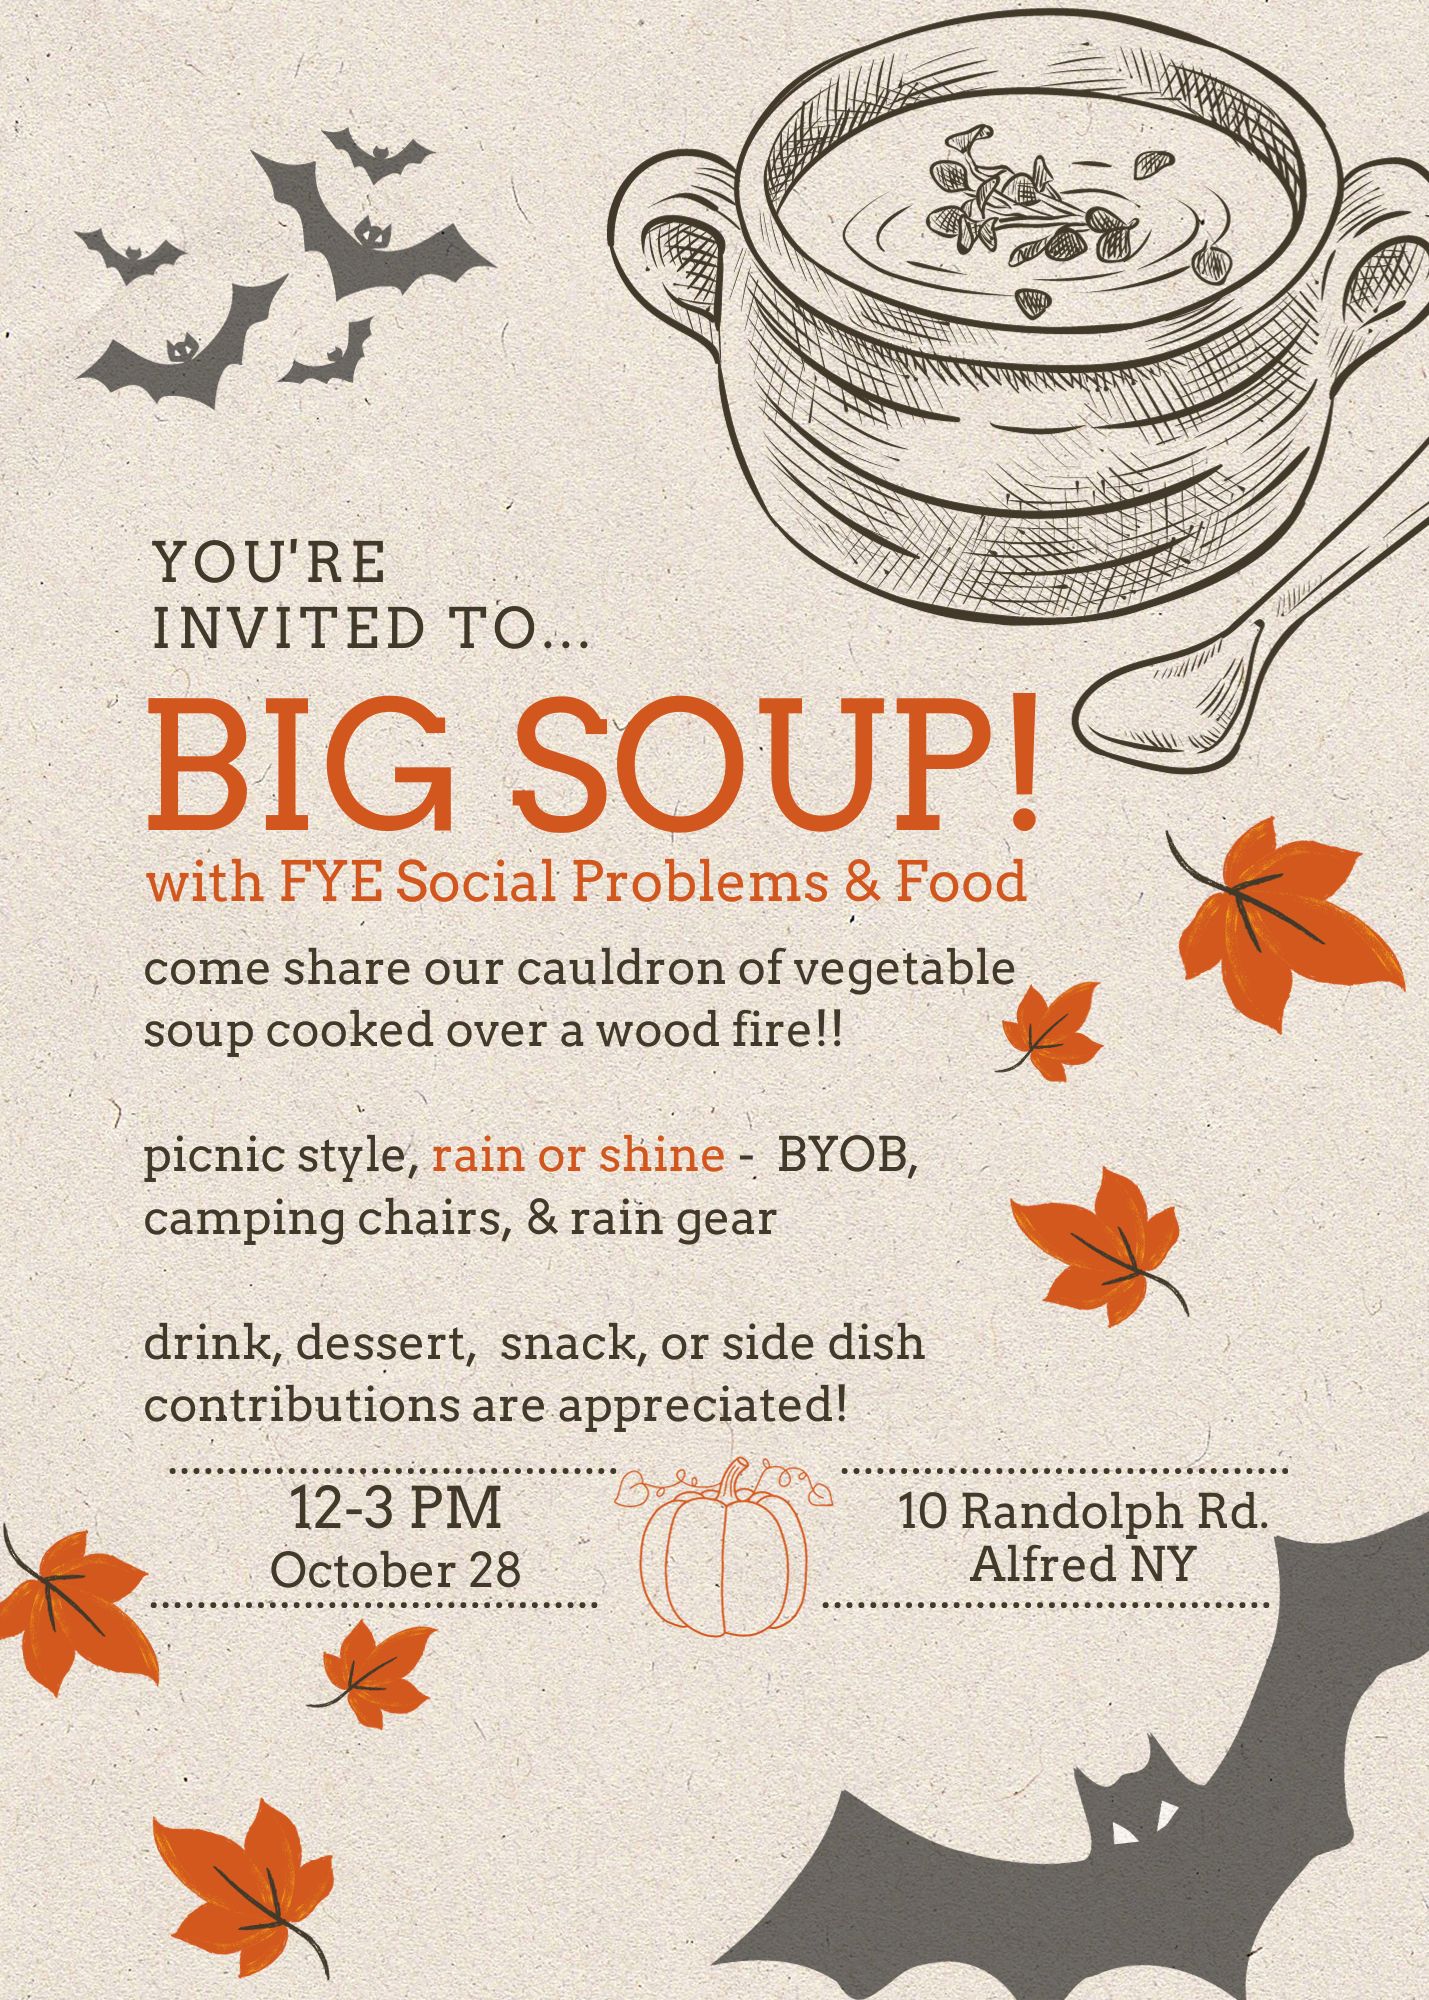 Not Your Grandfather’s Soup: Big Soup!